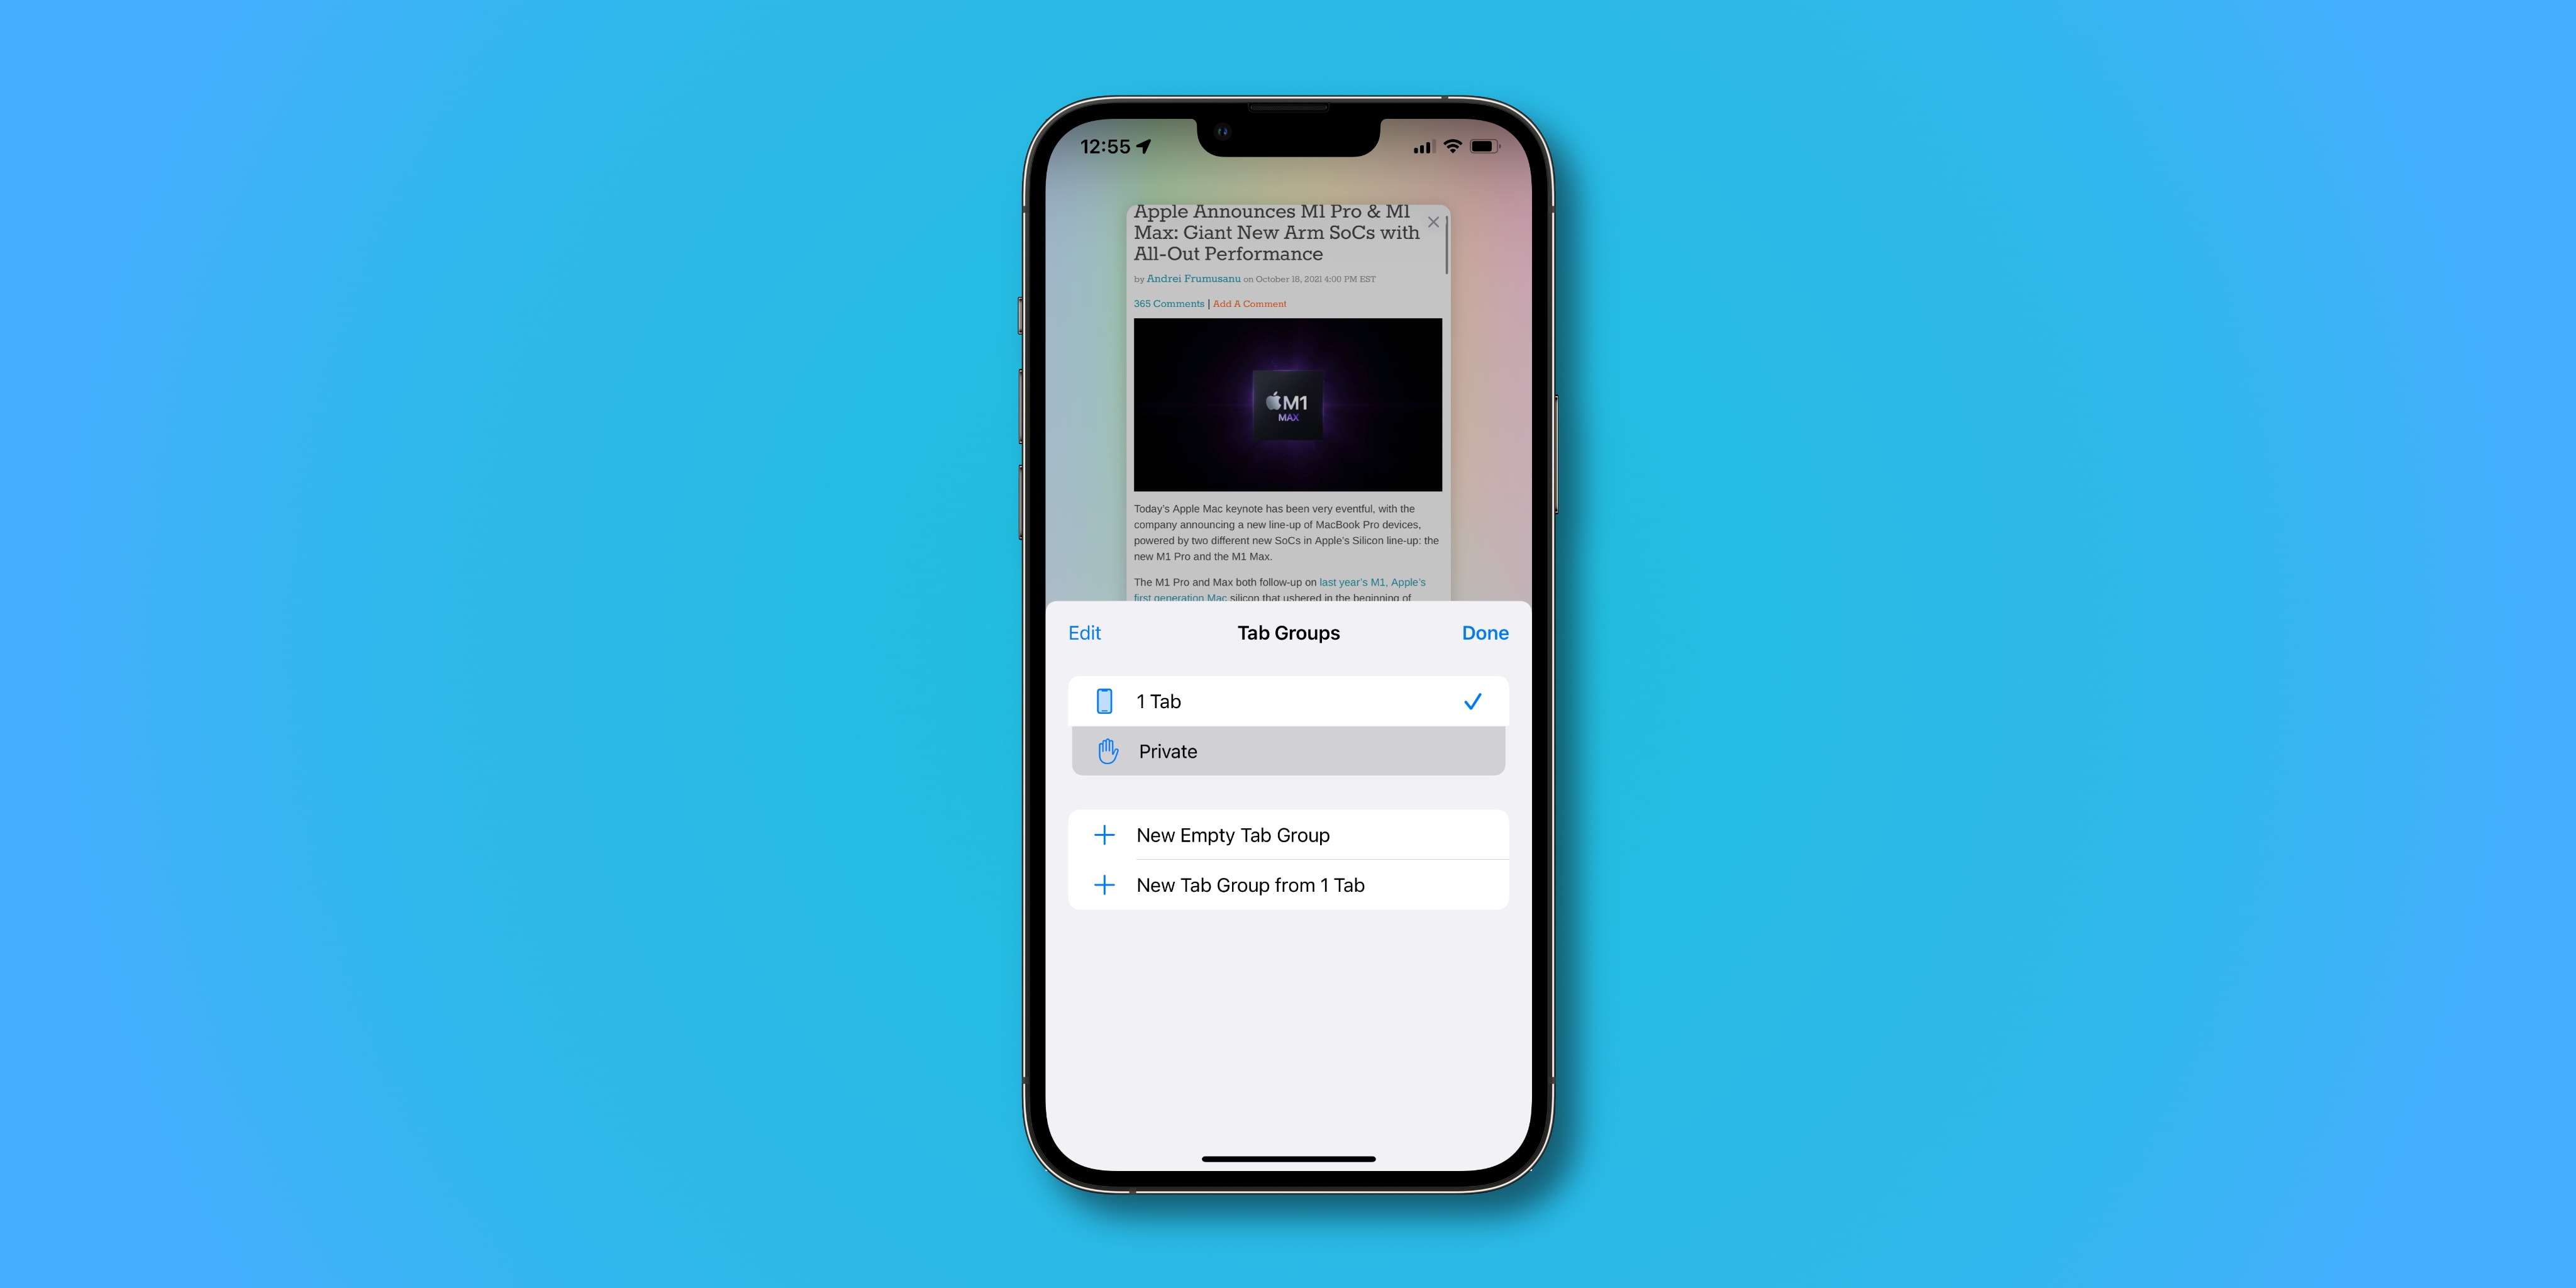 A screenshot showing a new private tab group in Apple's Safari browser in iOS 15 on iPhone